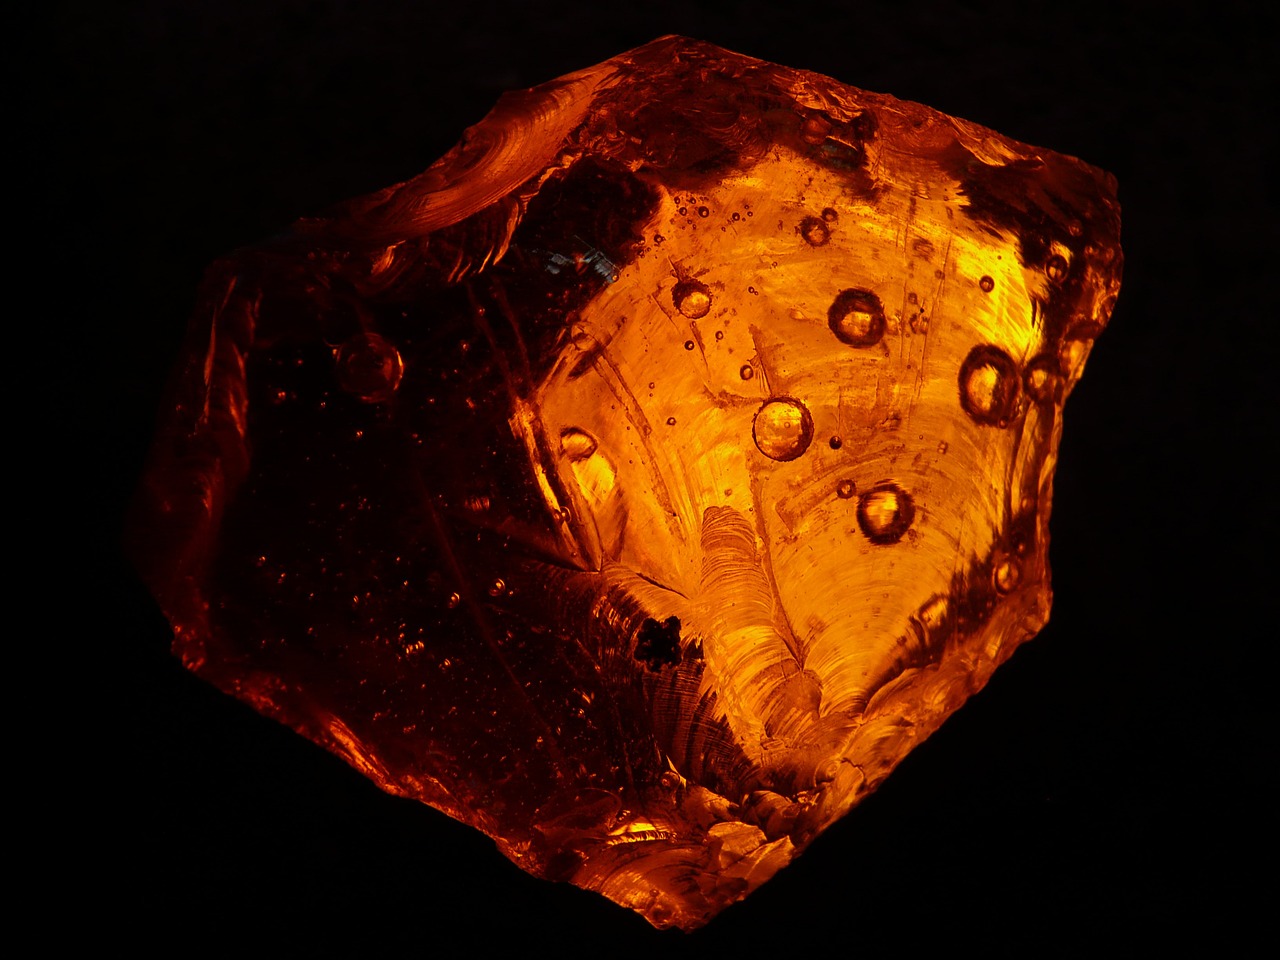 Amber - Image by Hans Braxmeier from Pixabay